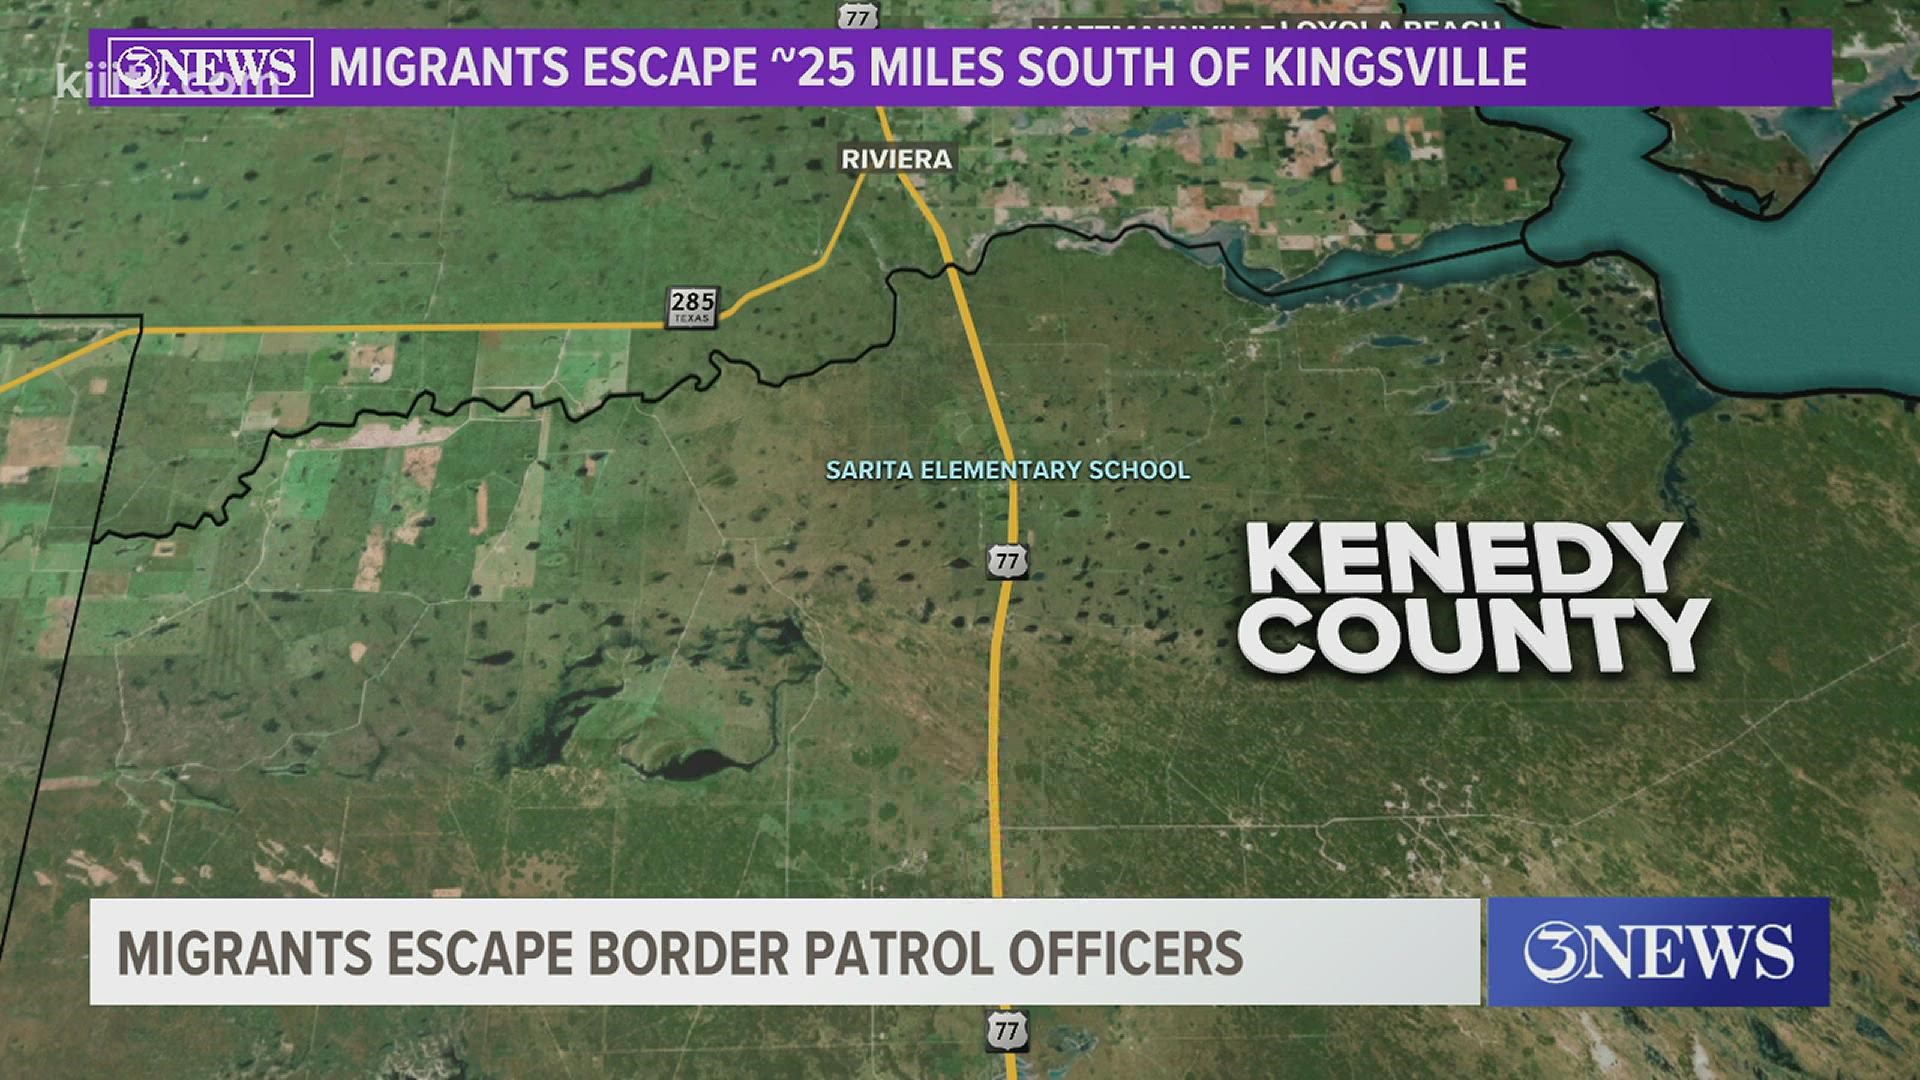 The bus was about 25 miles south of Kingsville when the incident took place around 4:30 p.m. Monday afternoon.